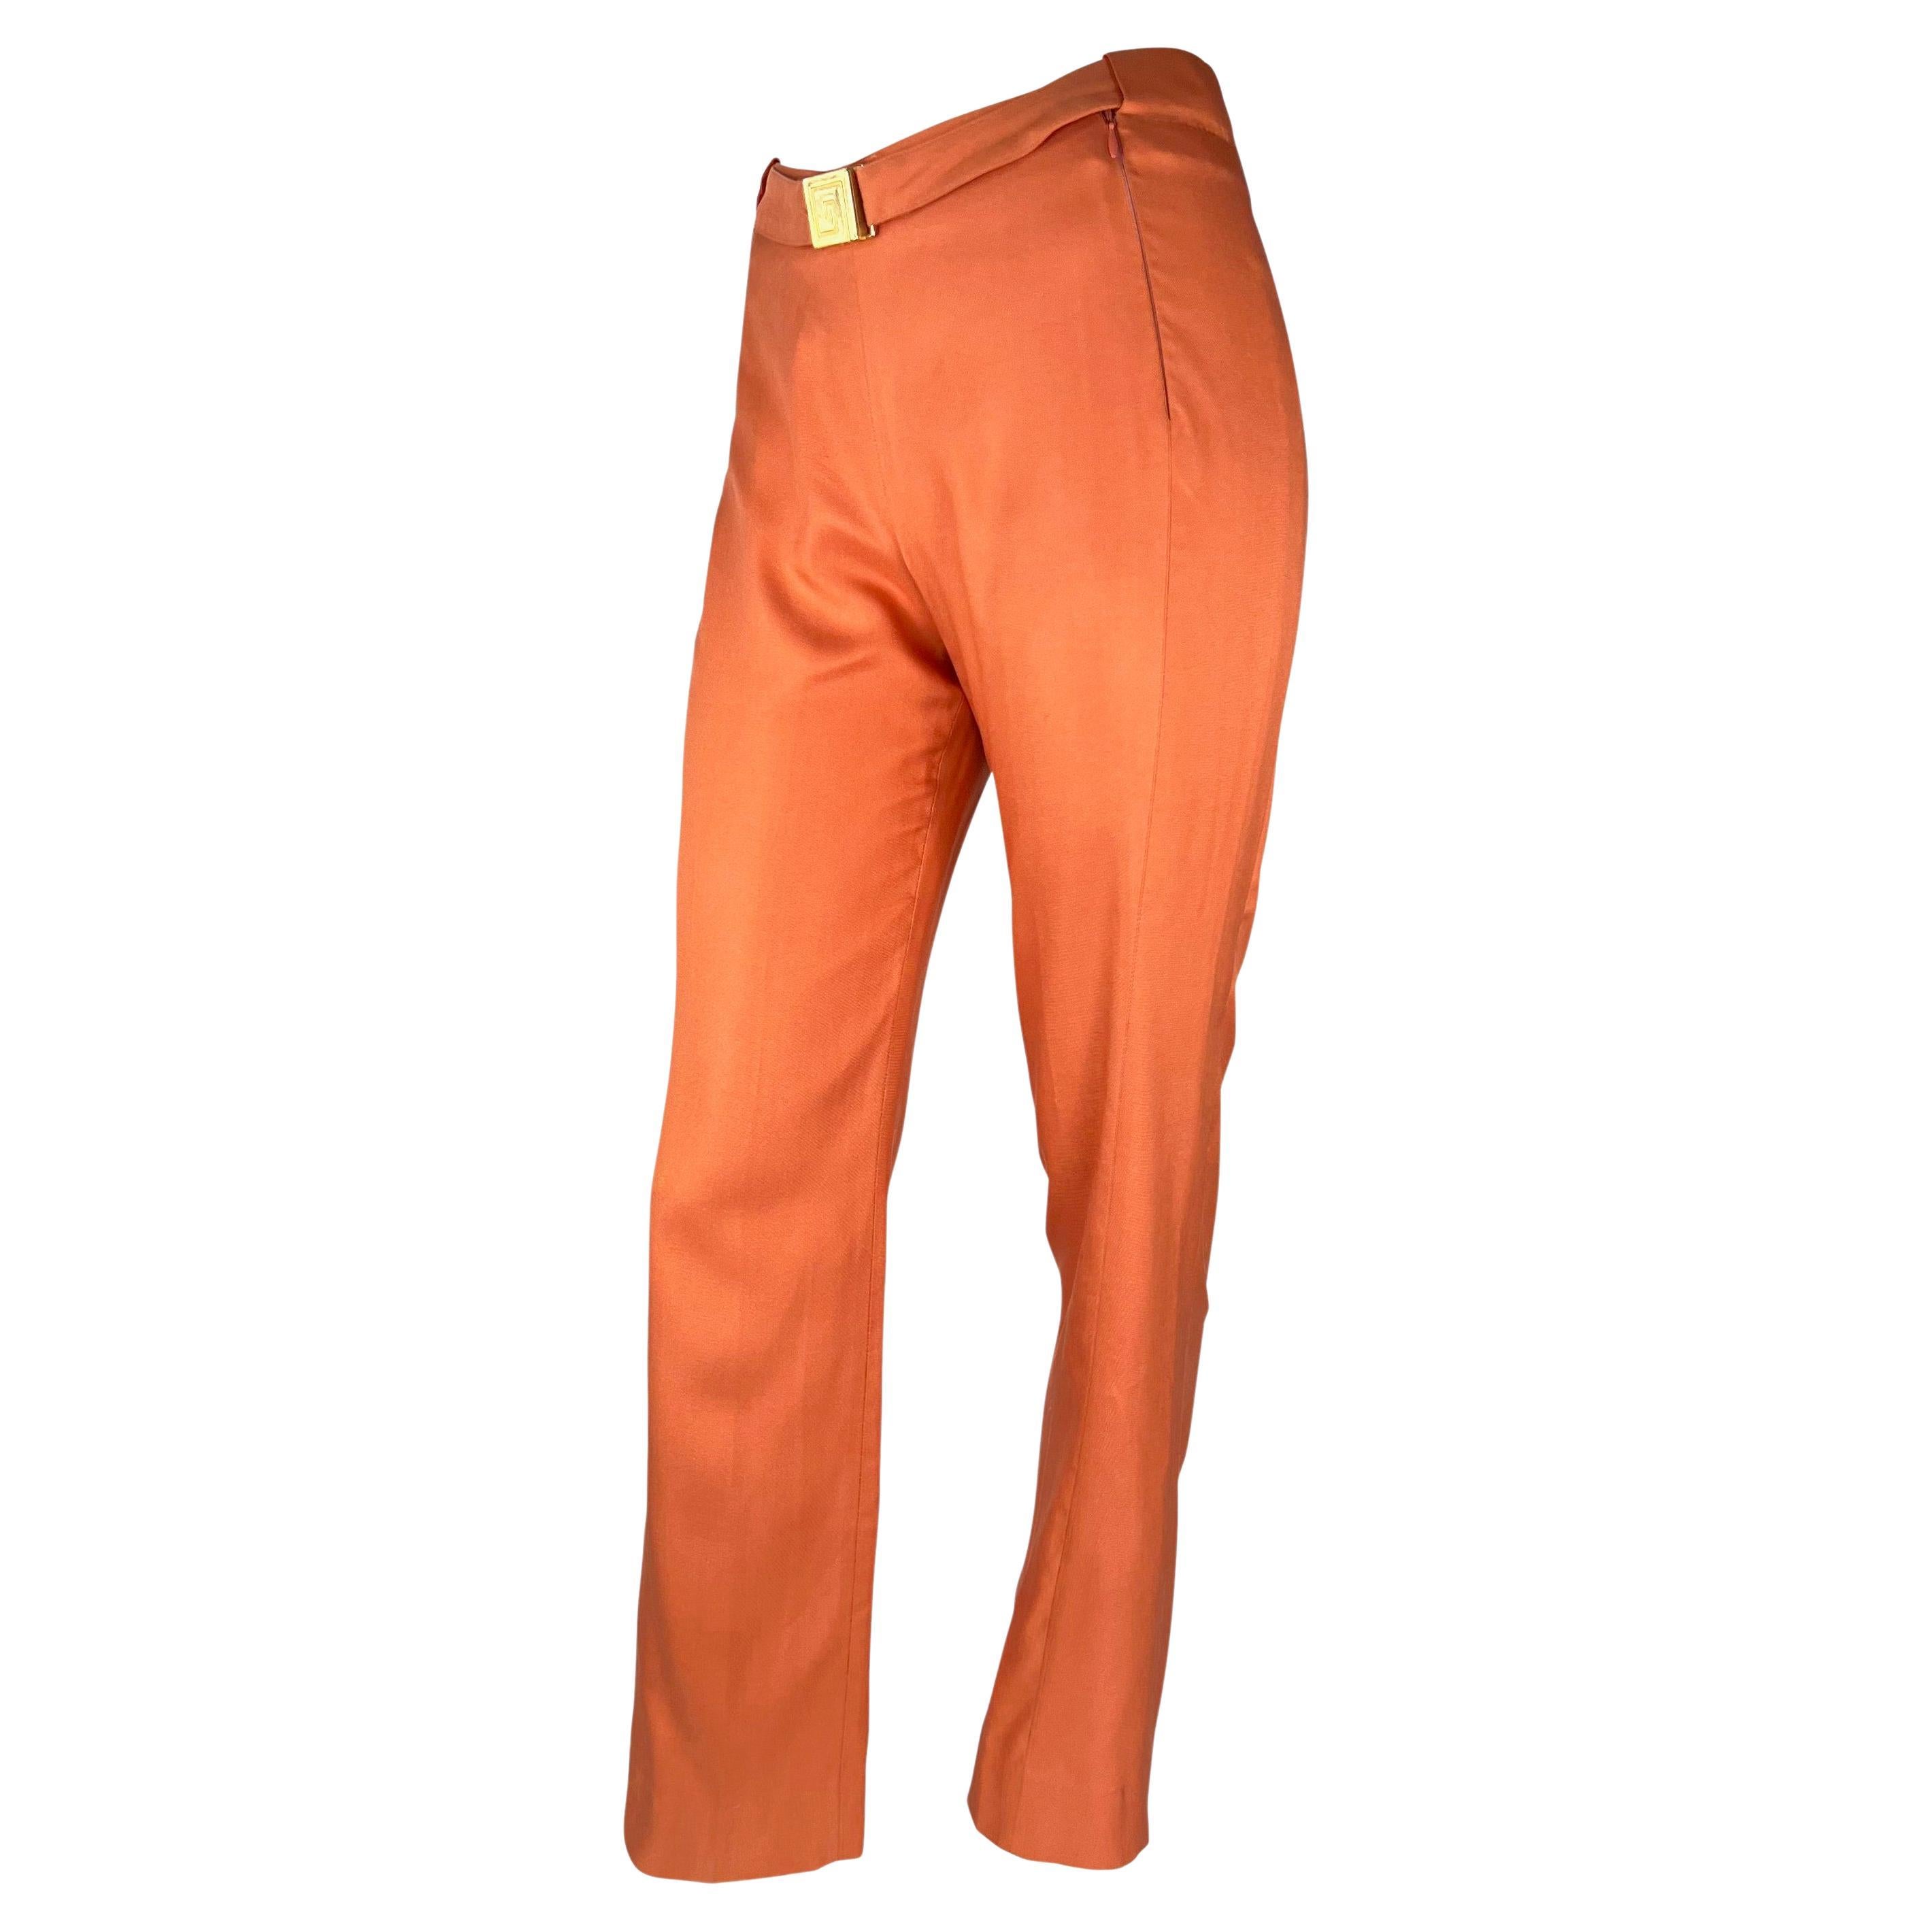 Presenting a pair of vibrant orange Gianni Versace Couture pants, designed by Donatella Versace. From the Fall/Winter 2000 collection, these wide-leg pants are constructed entirely of orange silk and are made complete with a built-in belt with a